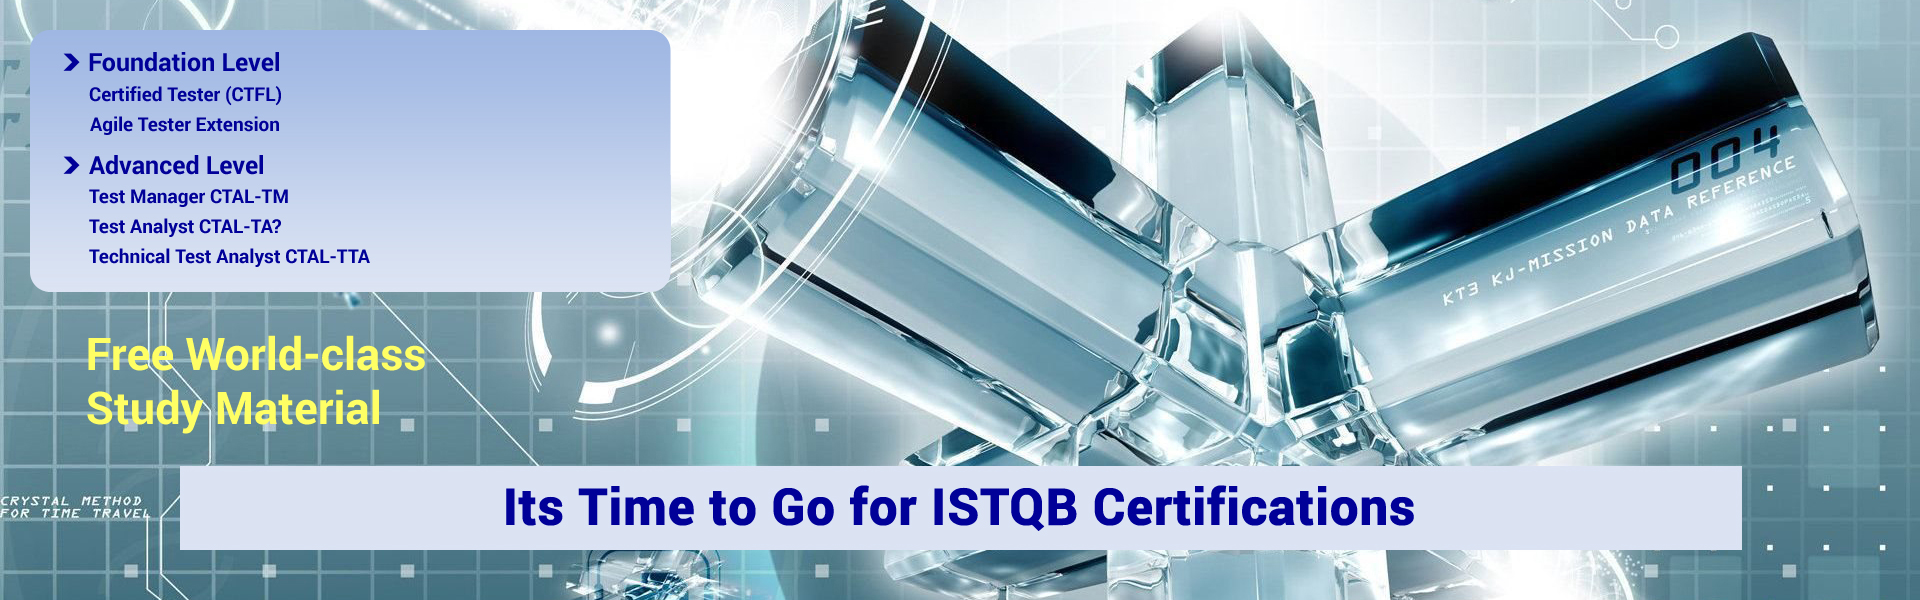 ISTQB Certifications-Stepping Stone for Shaping Career in Software Testing